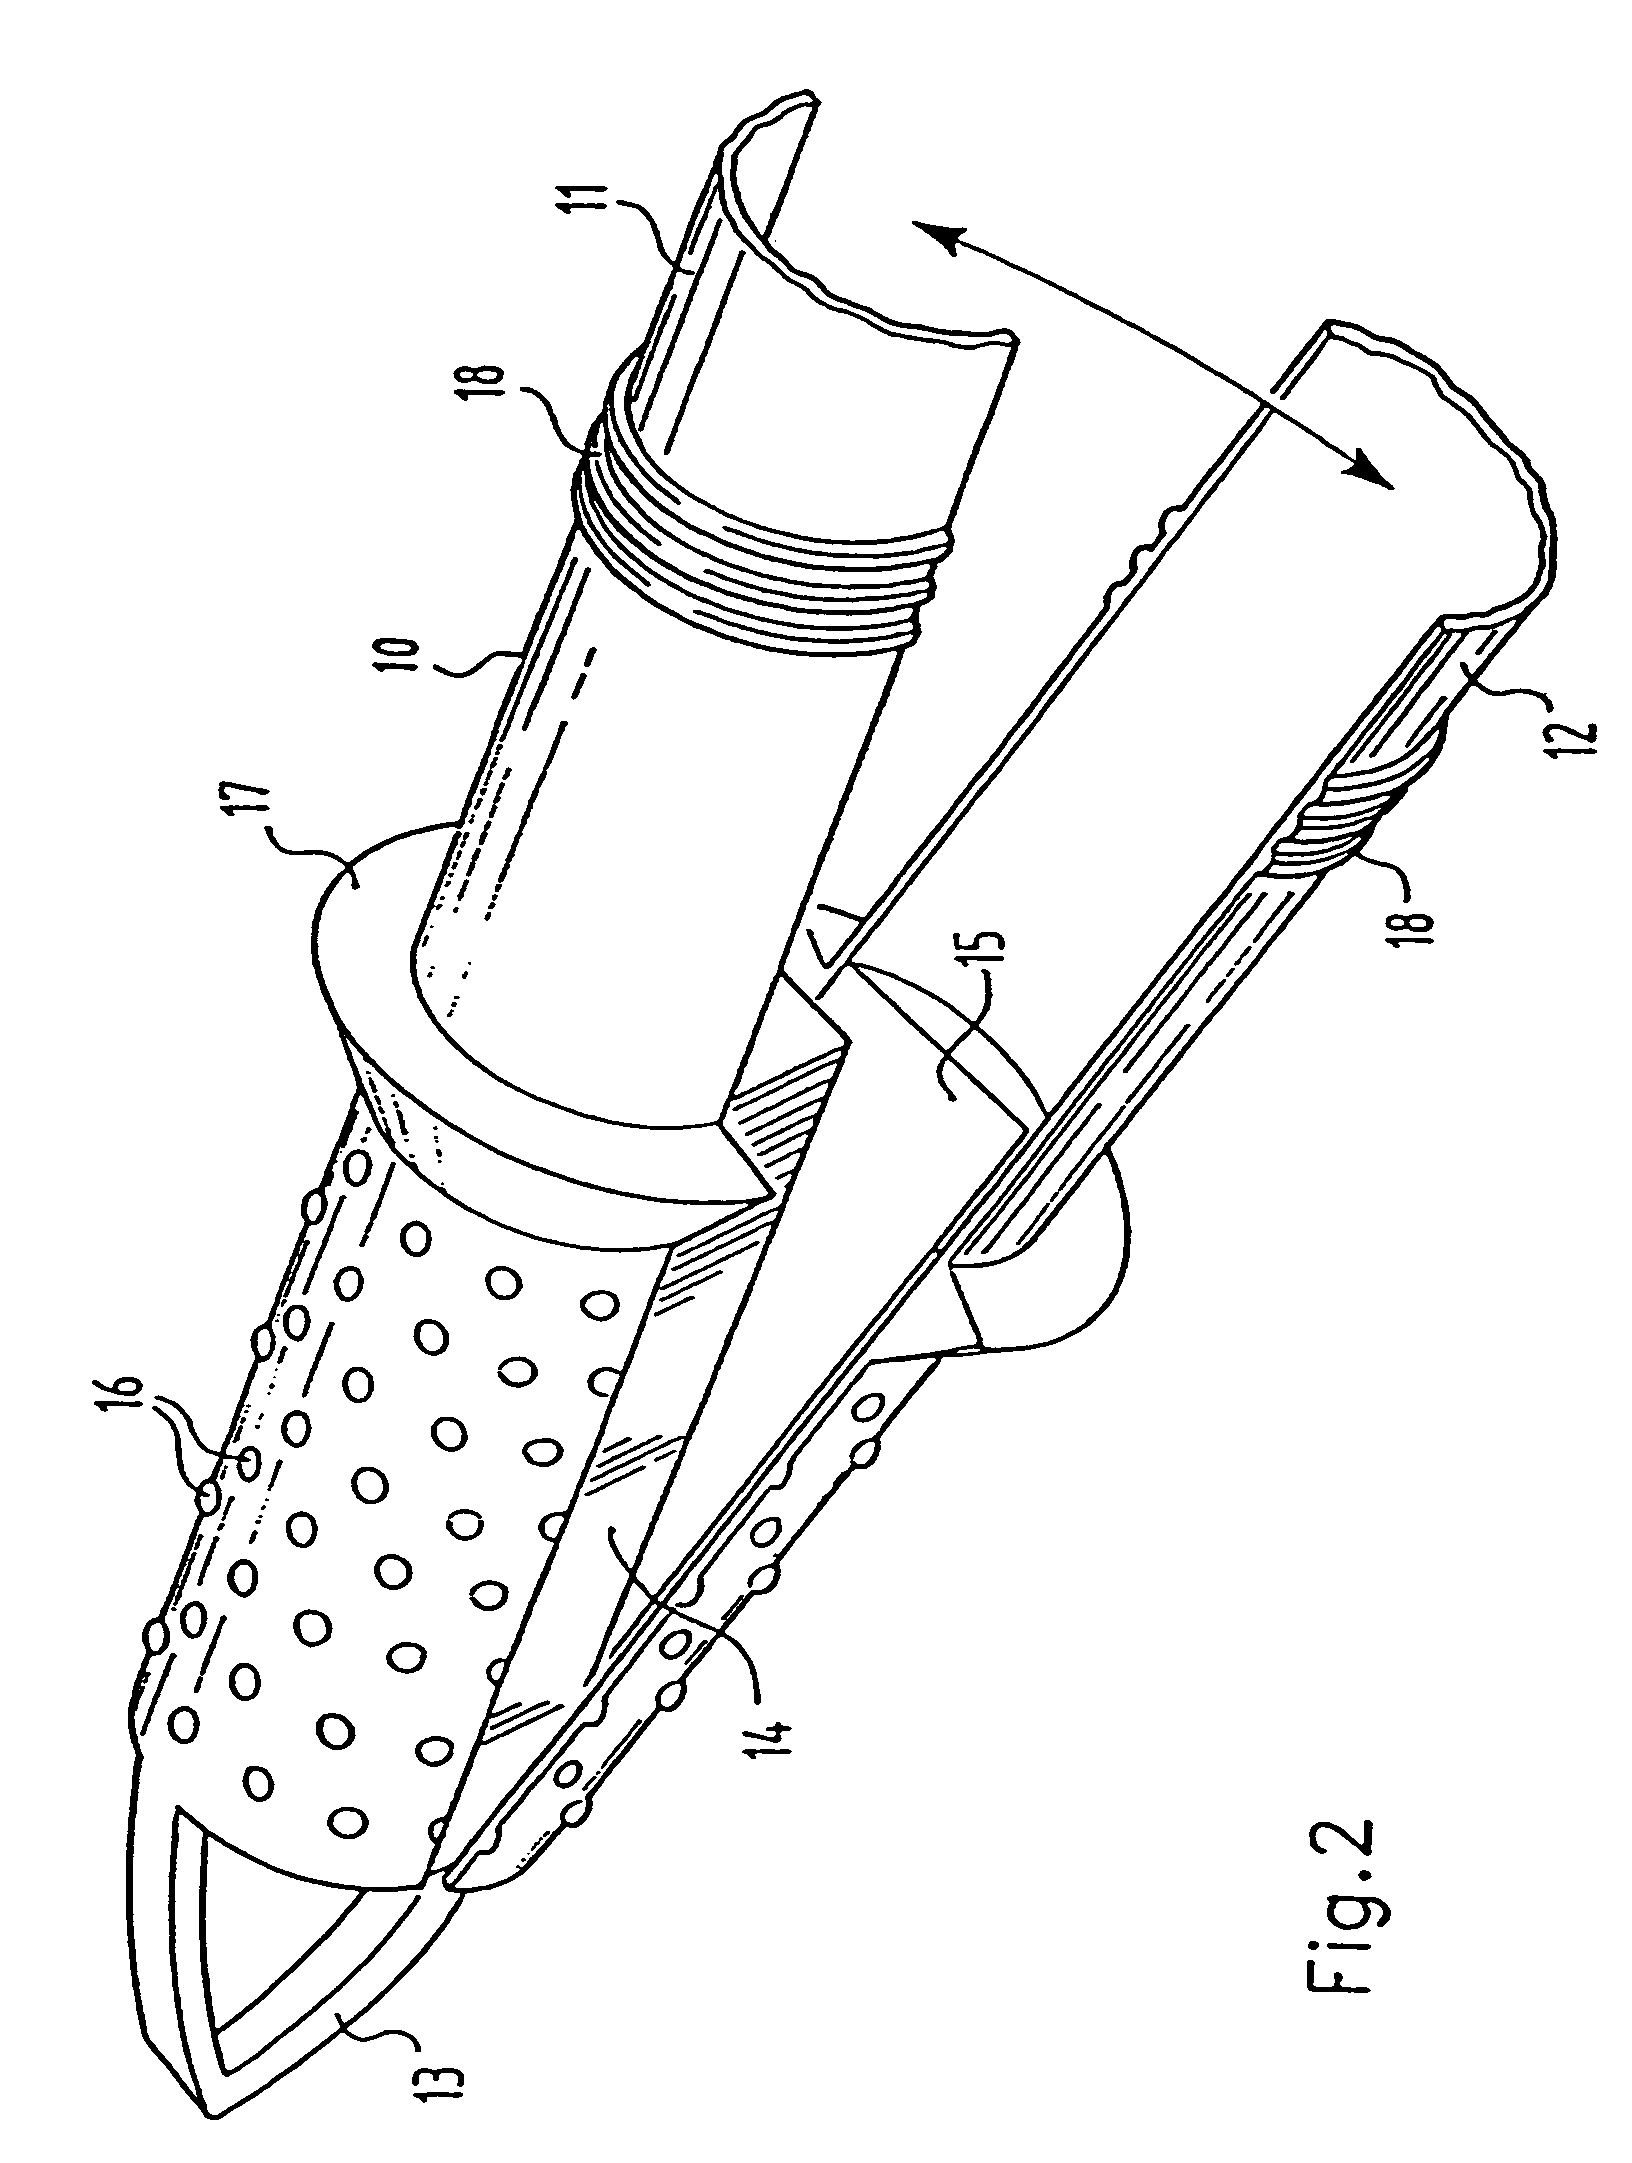 Device for taking and examining samples